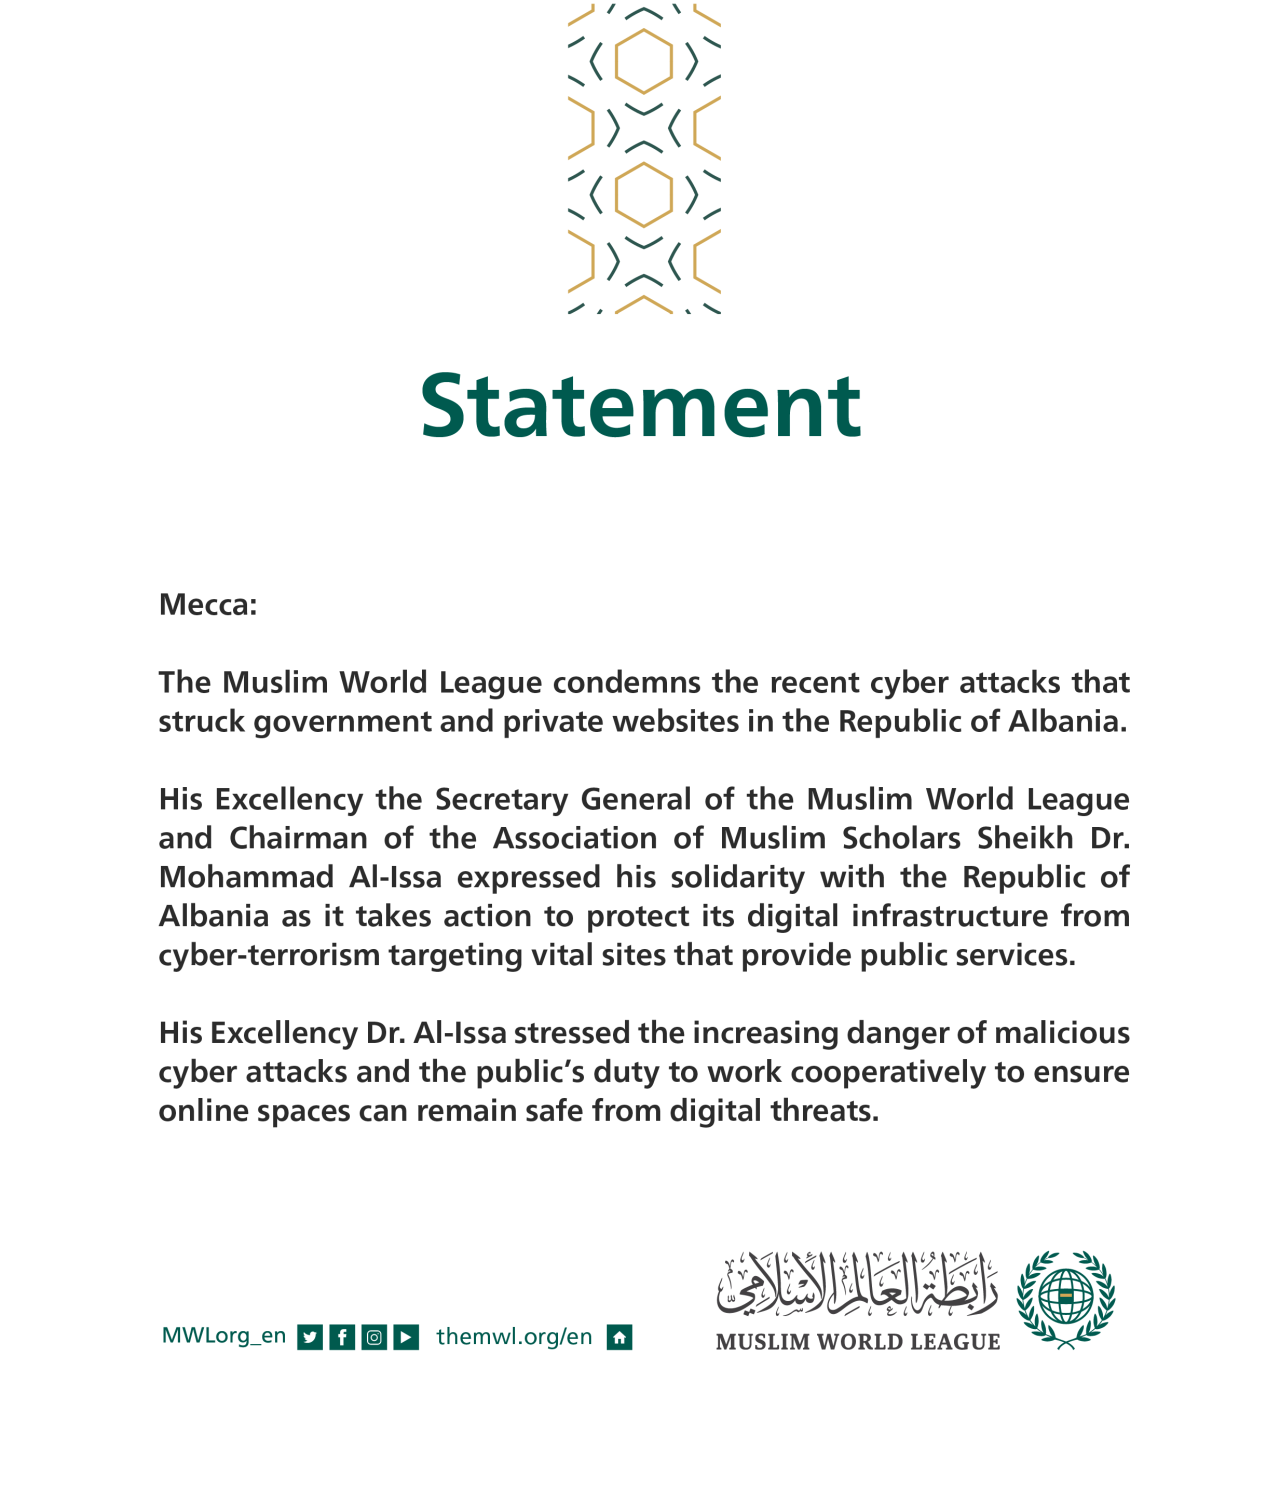 Statement from the Muslim World League 